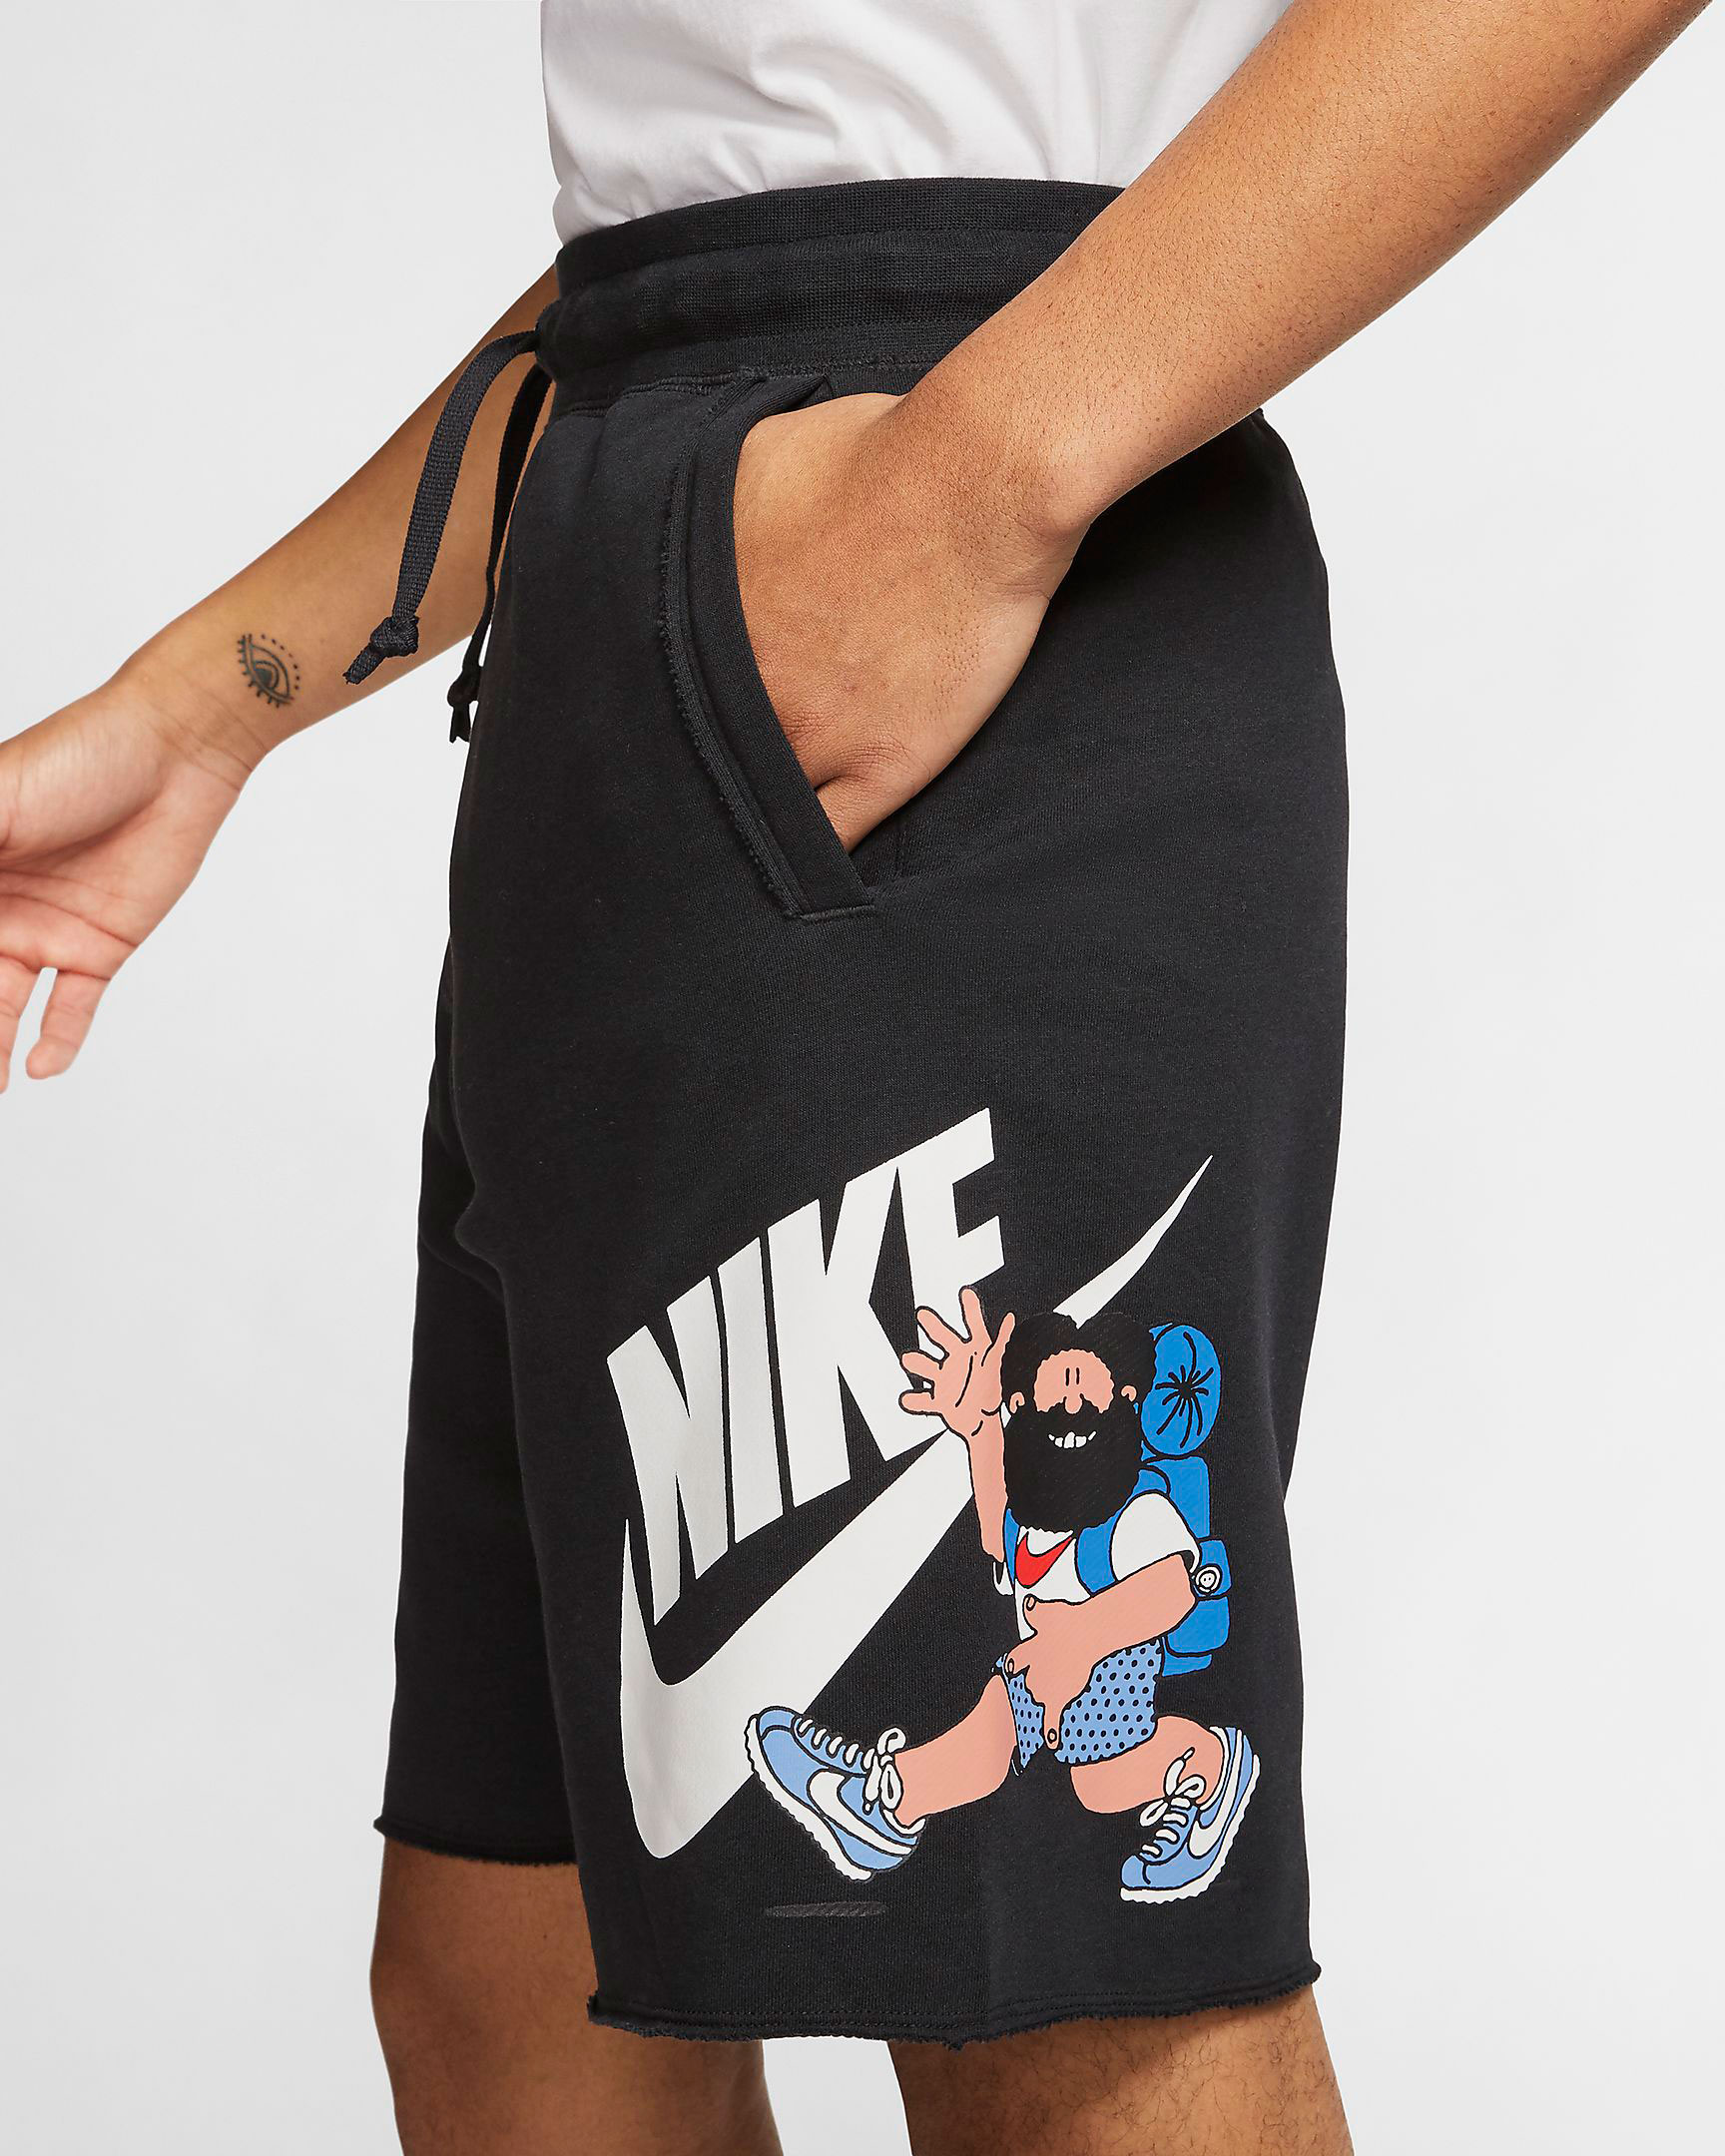 nike shorts with cartoon characters